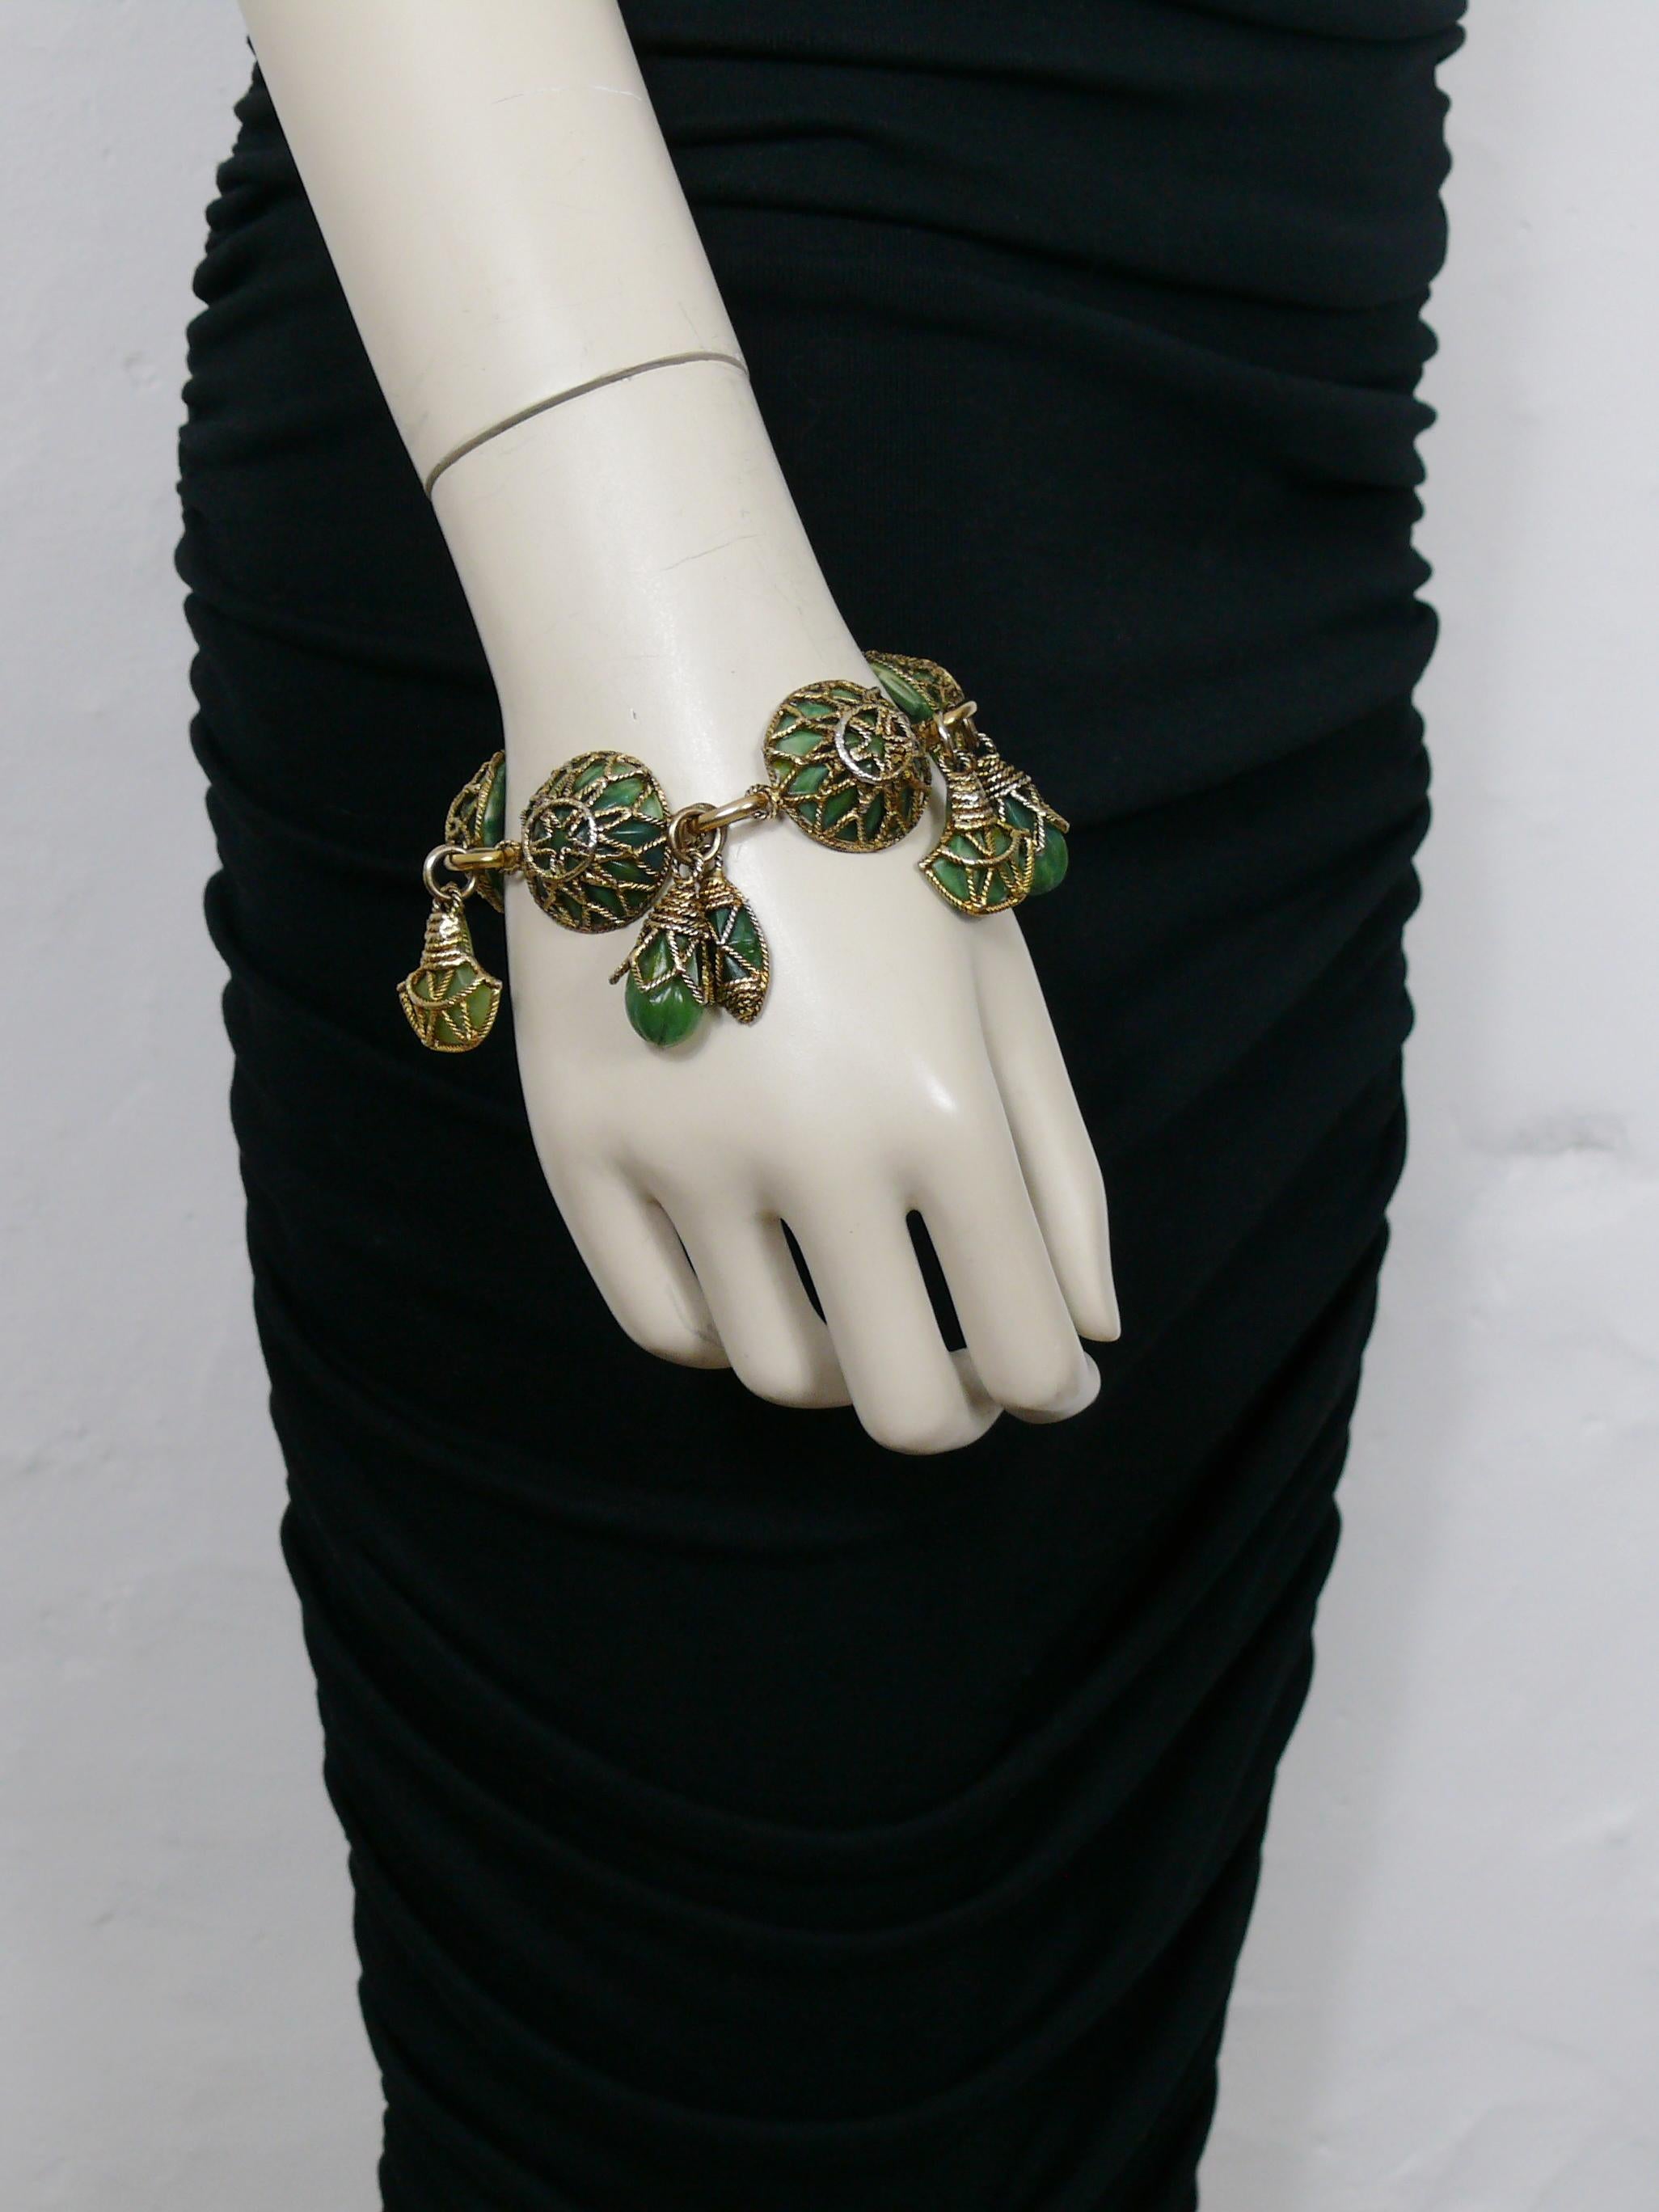 SATELLITE Paris vintage antiqued gold toned bracelet featuring domed filigree links and charms embellished with faux jade resin cabochons.

T-bar closure.

Embossed SATELLITE.

Indicative measurements : length approx. 21 cm (8.27 inches).

NOTES
-